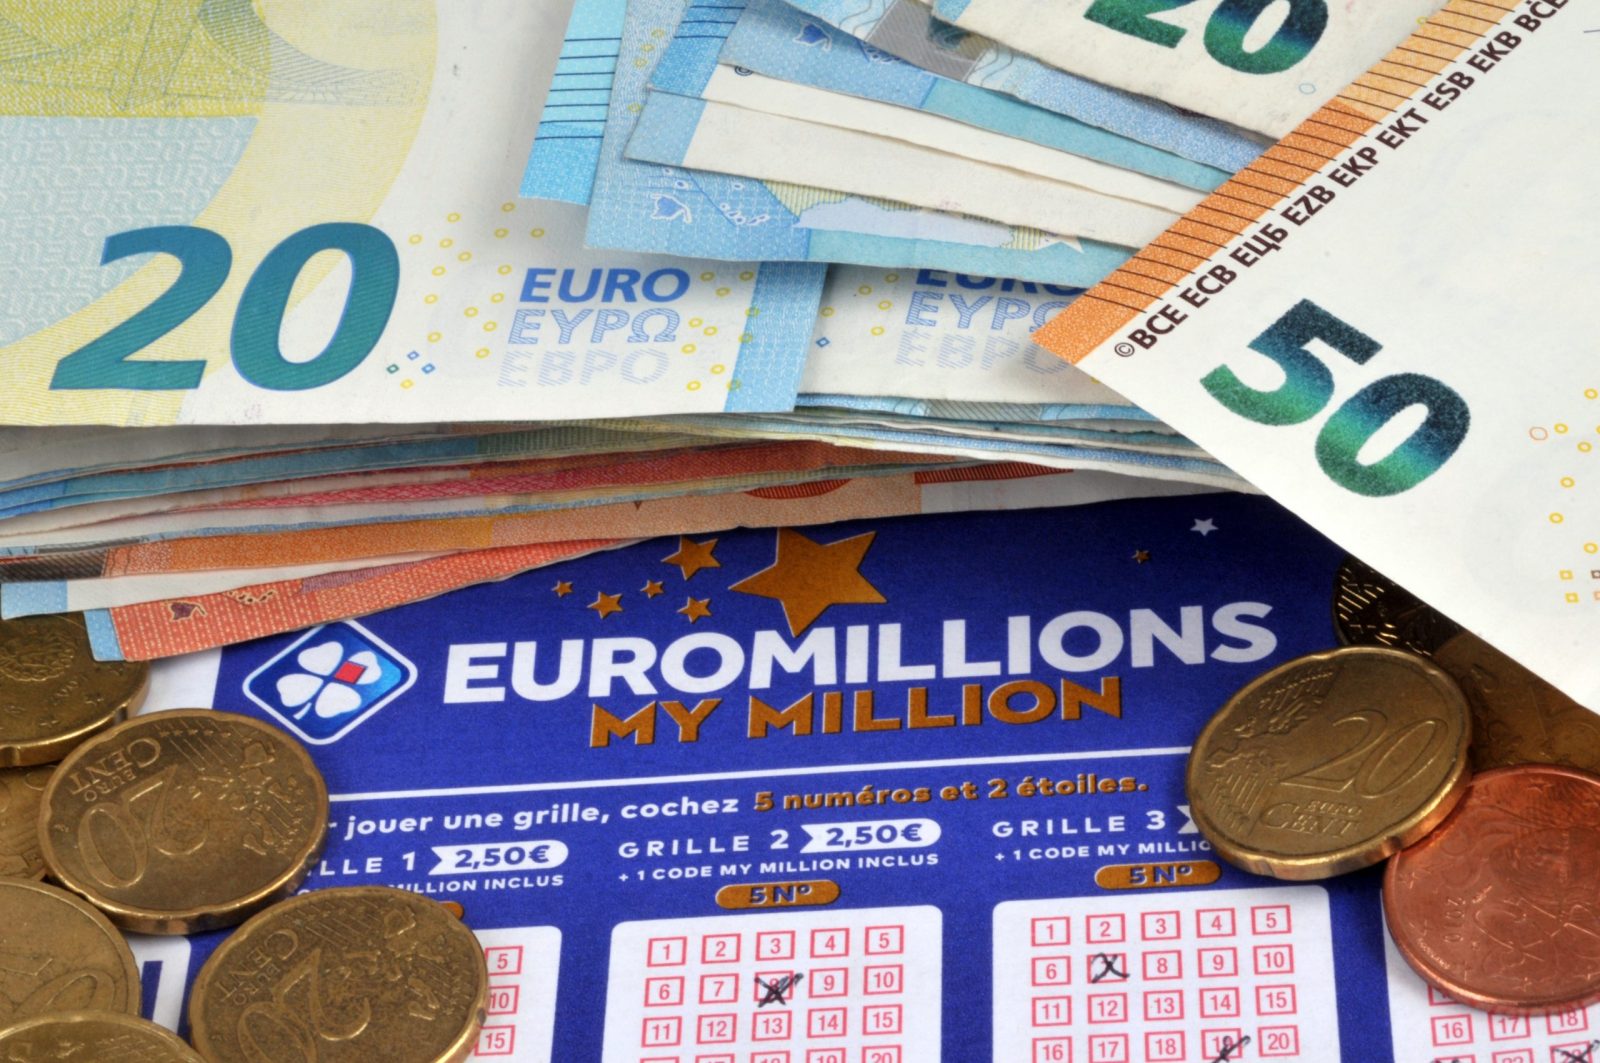 Euromillions grids with money close up